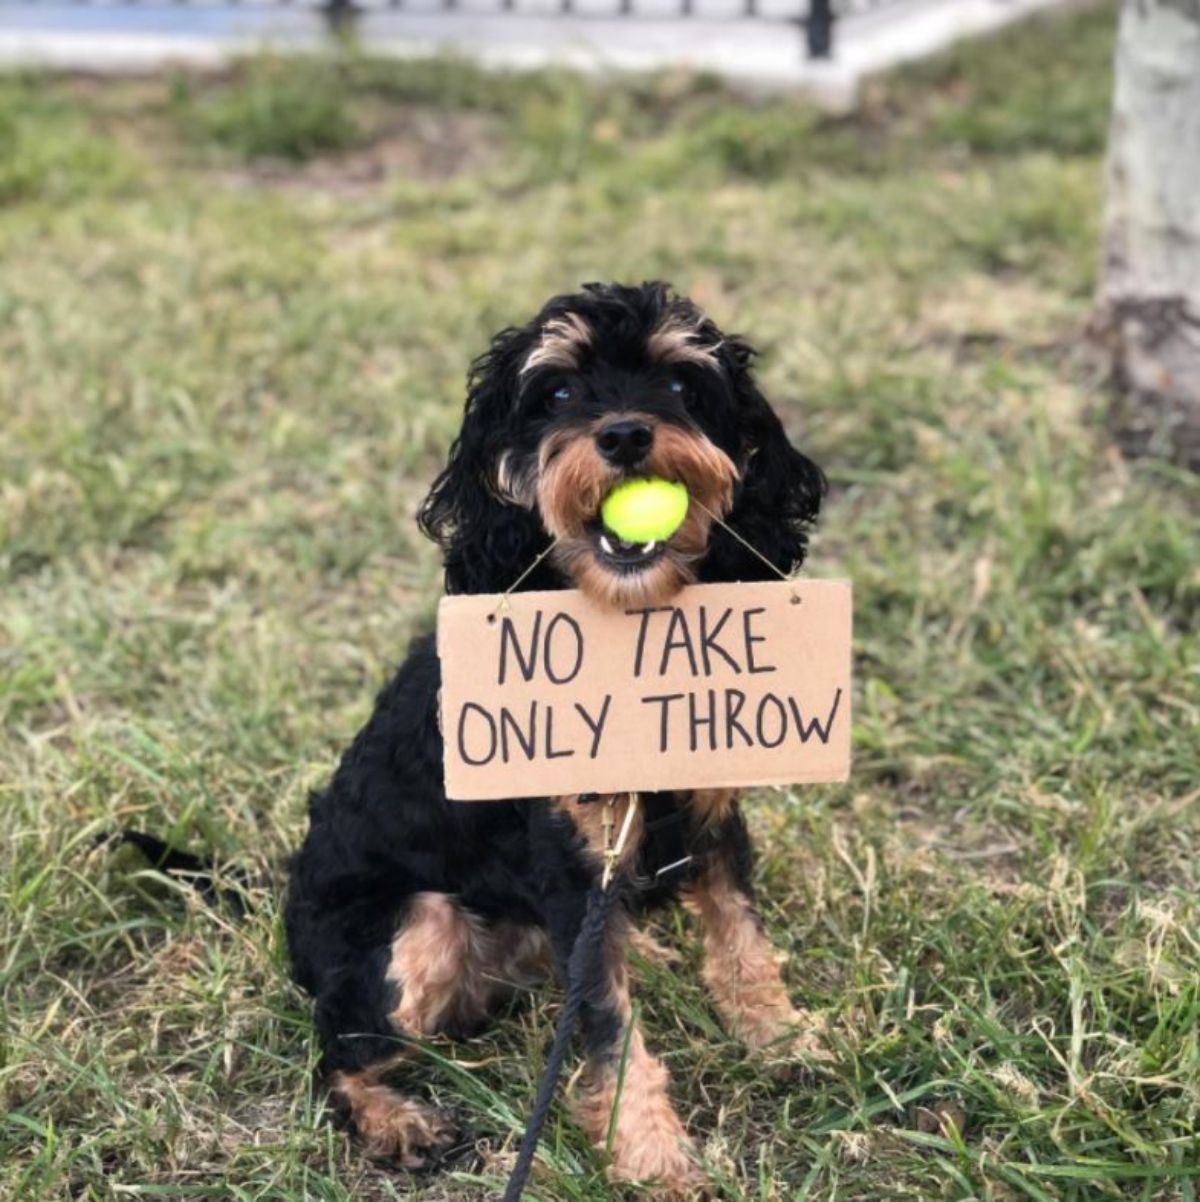 black and brown yorkshire terrier holding a yellow ball in its mouth and holding a sign saying no take only throw